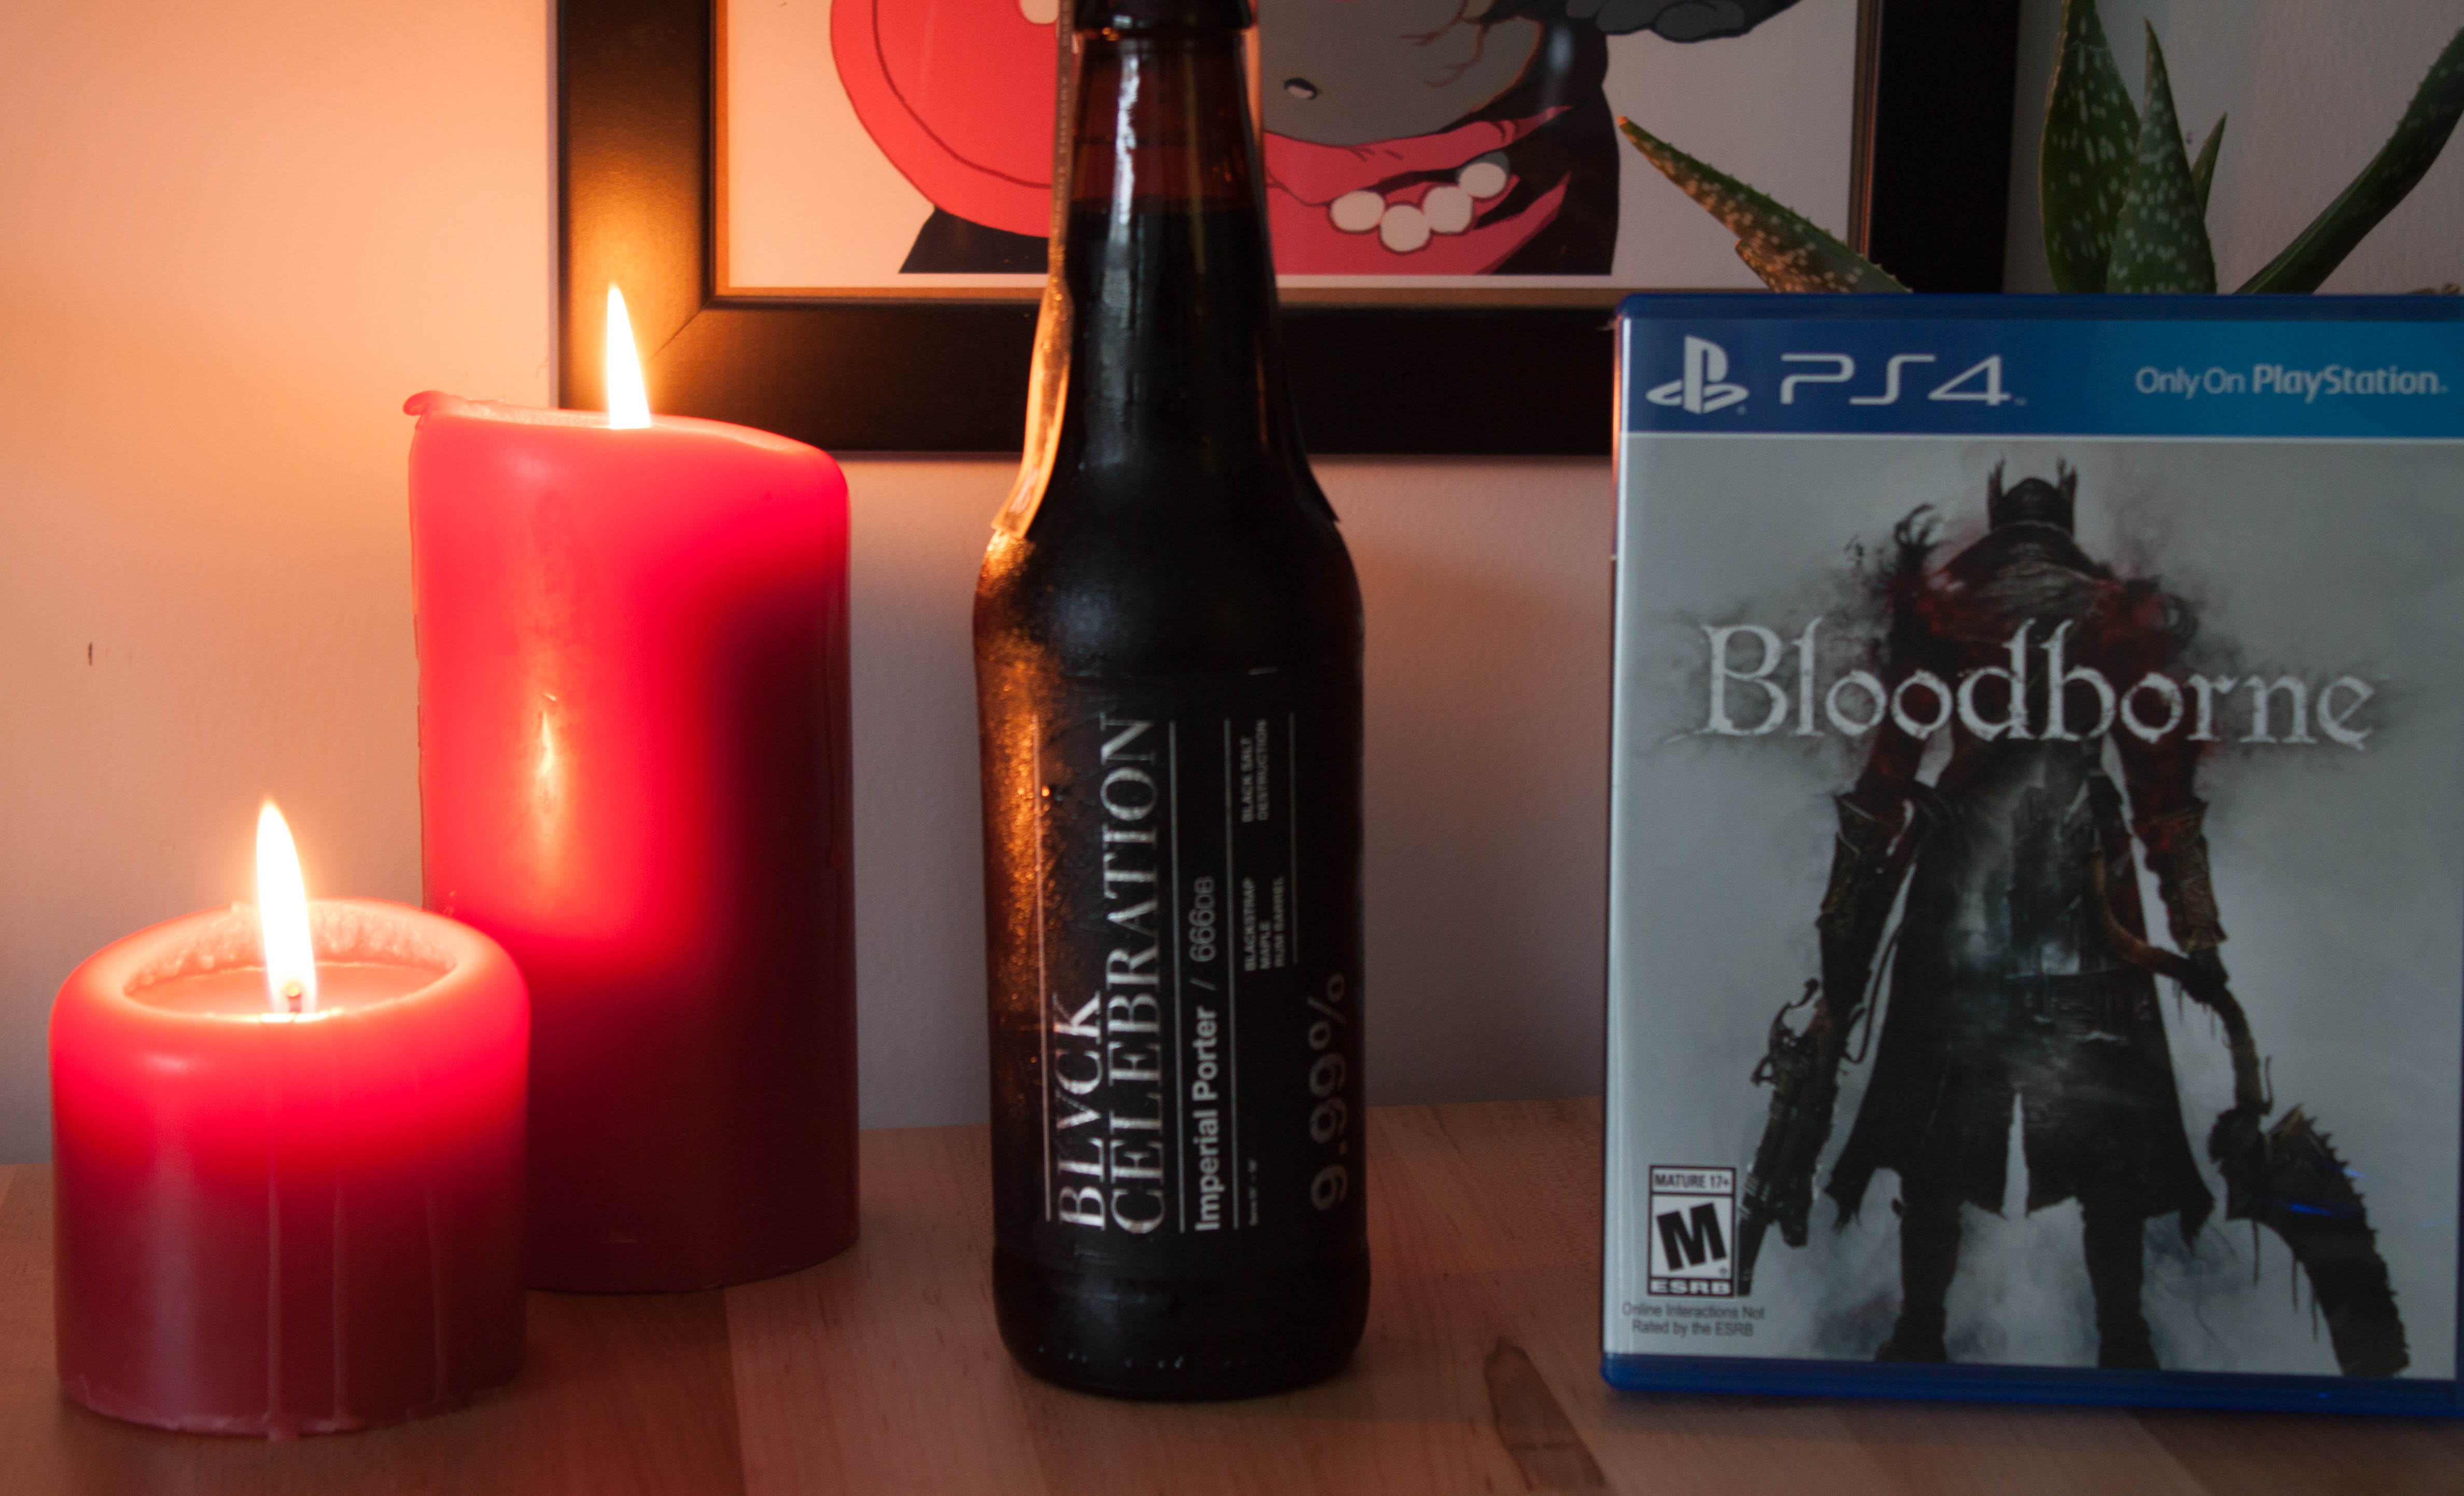 Digital Draughts: Bloodborne with Adroit Theory Brewing Company’s
BLVCK Celebration